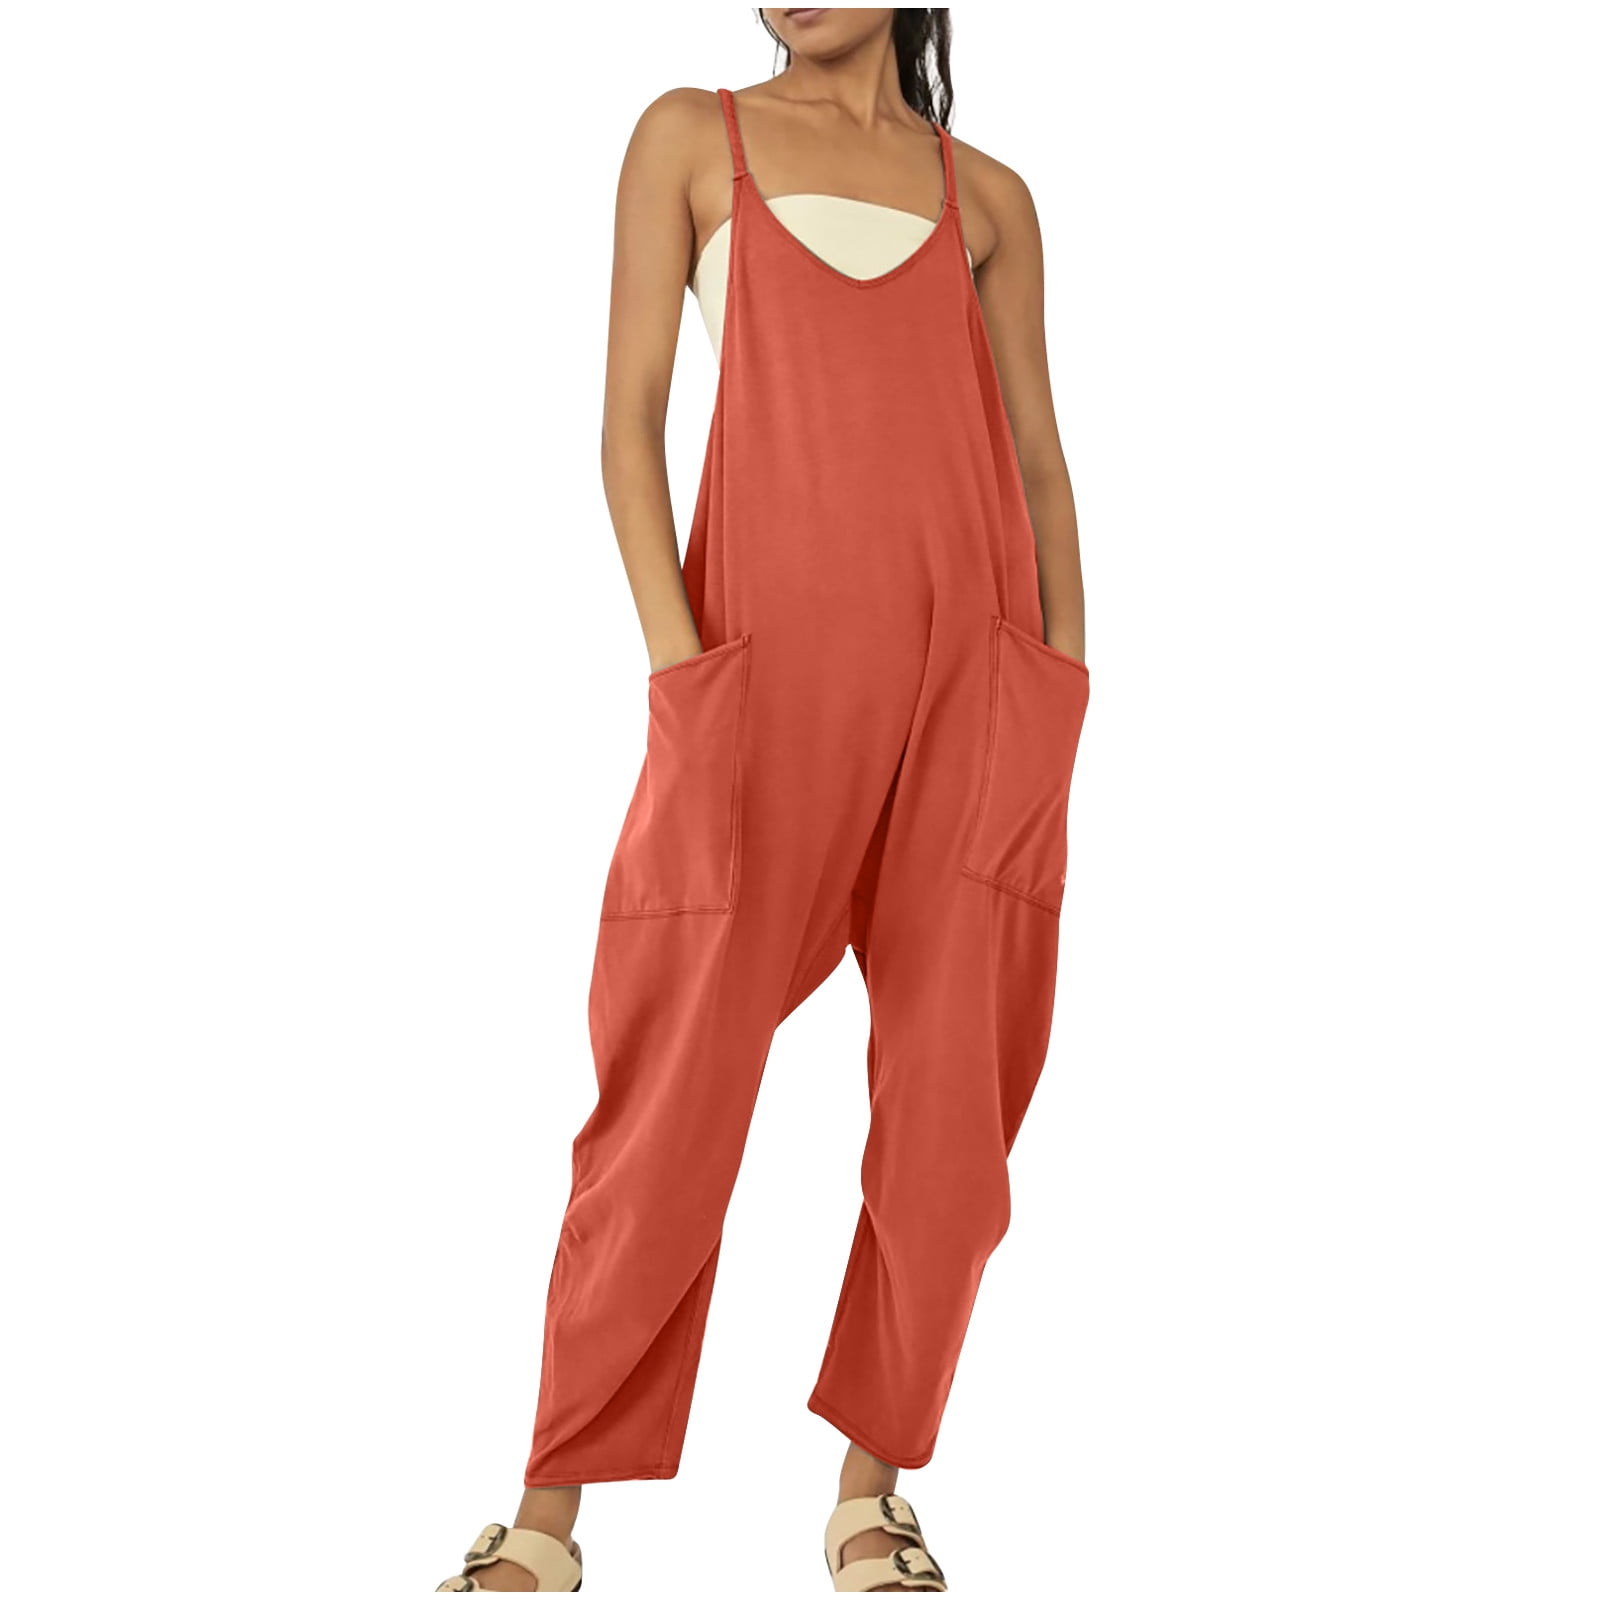 Women's Loose Sleeveless Jumpsuits Spaghetti Strap Stretchy Long Pant  Romper Jumpsuit with Pockets Casual Solid Wide Leg Pants